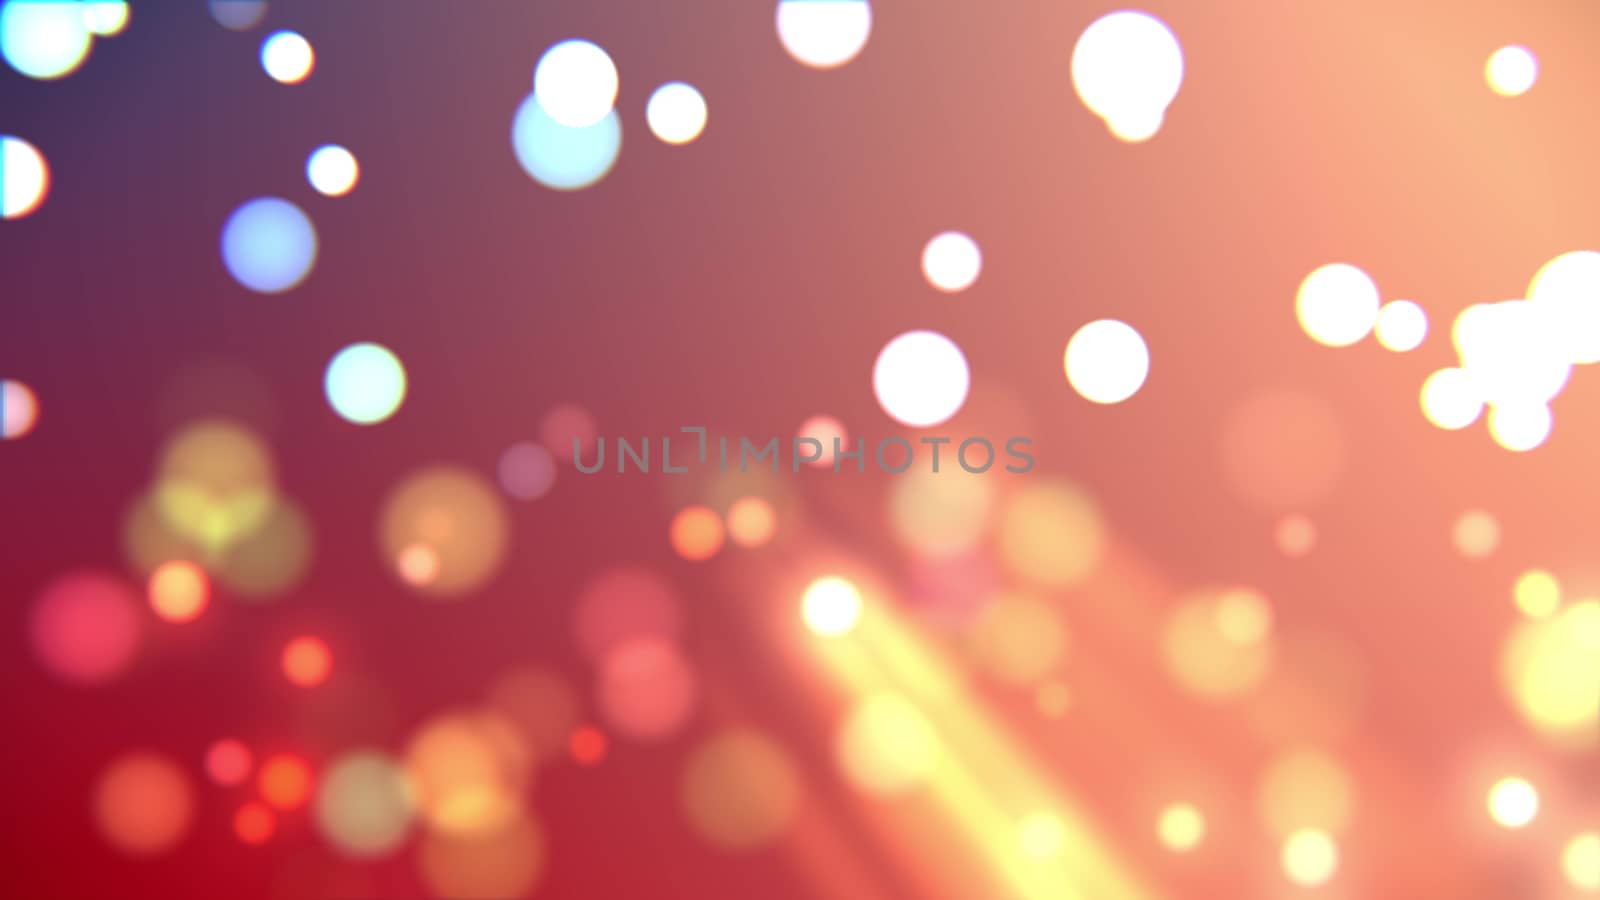 Abstract gradient with highlights and bokeh particles background, 3d rendering romantic or spring background